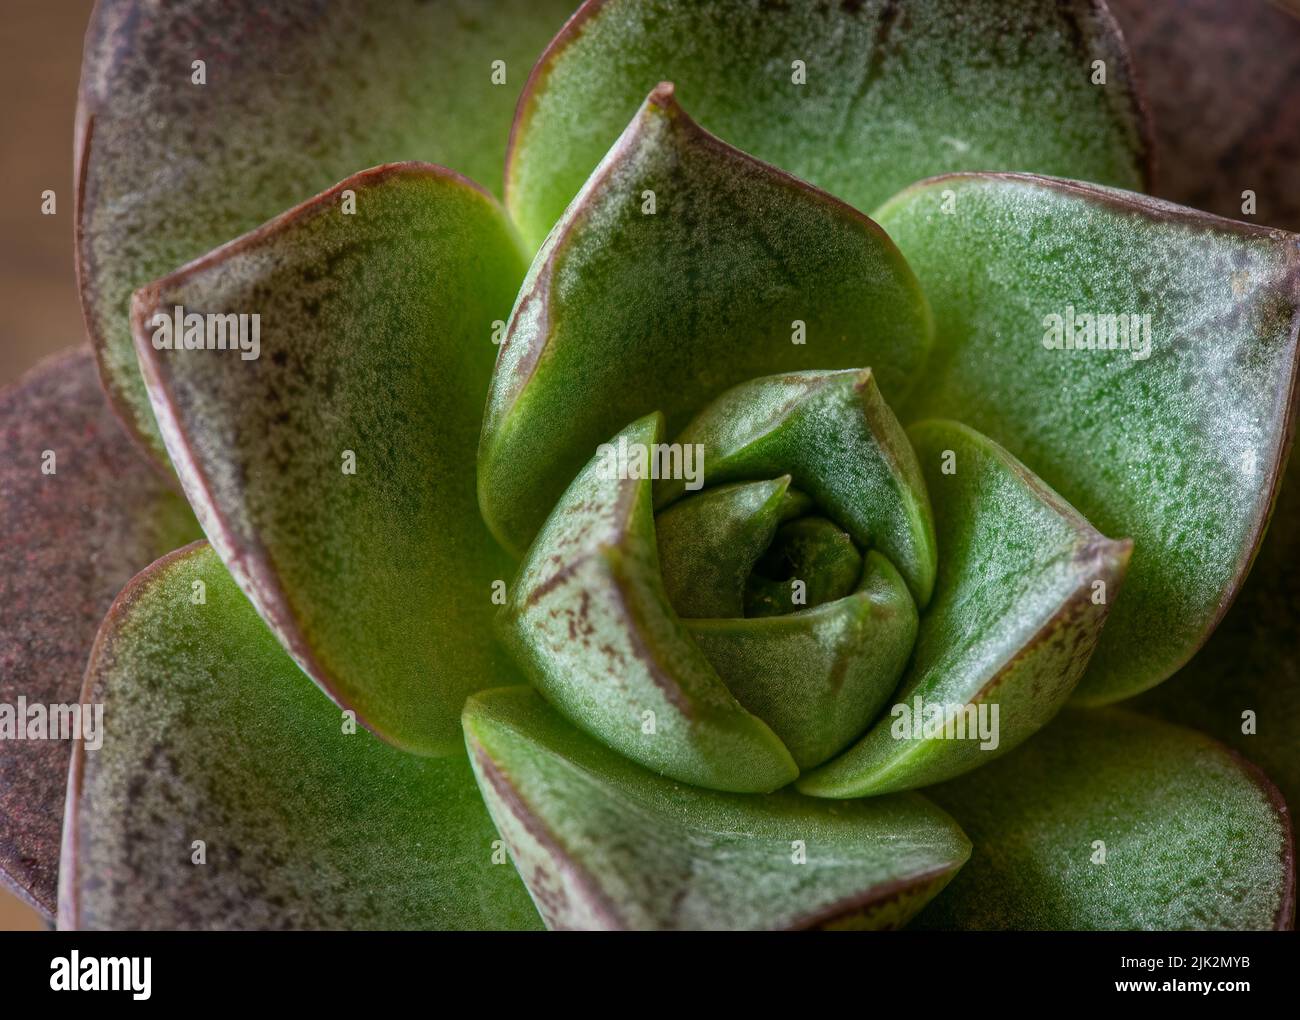 Brown and green together in this popular house plant, socasing natures beauty in this succulent plant and its close up petals ready for the garden pla Stock Photo